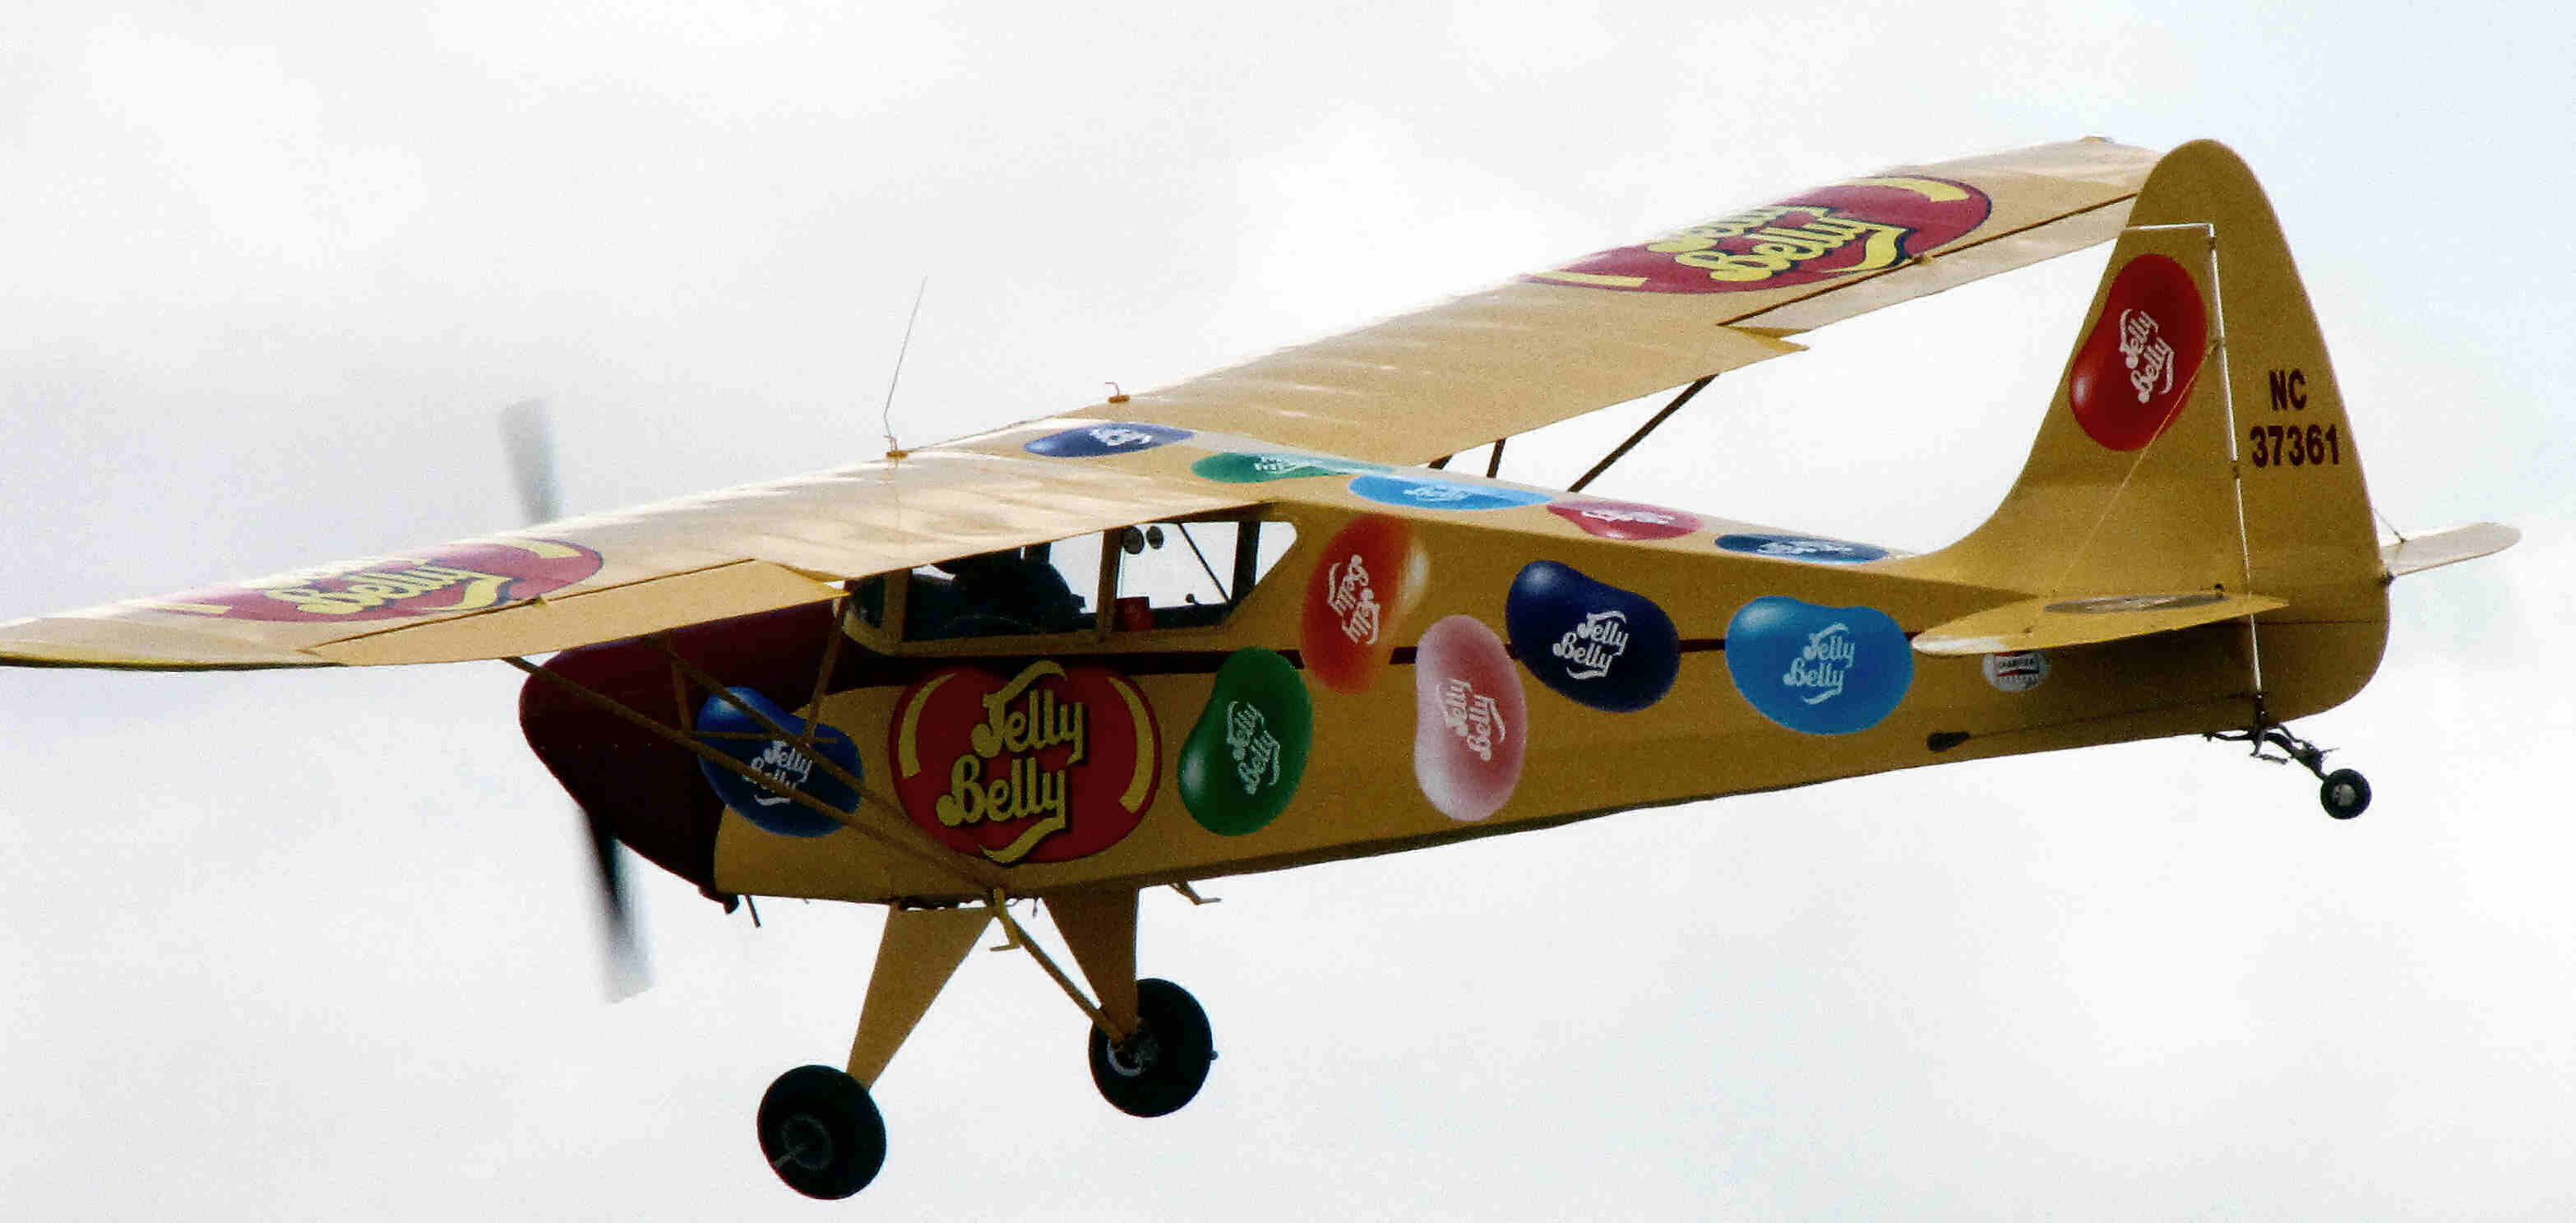 Jelly Belly aircraft